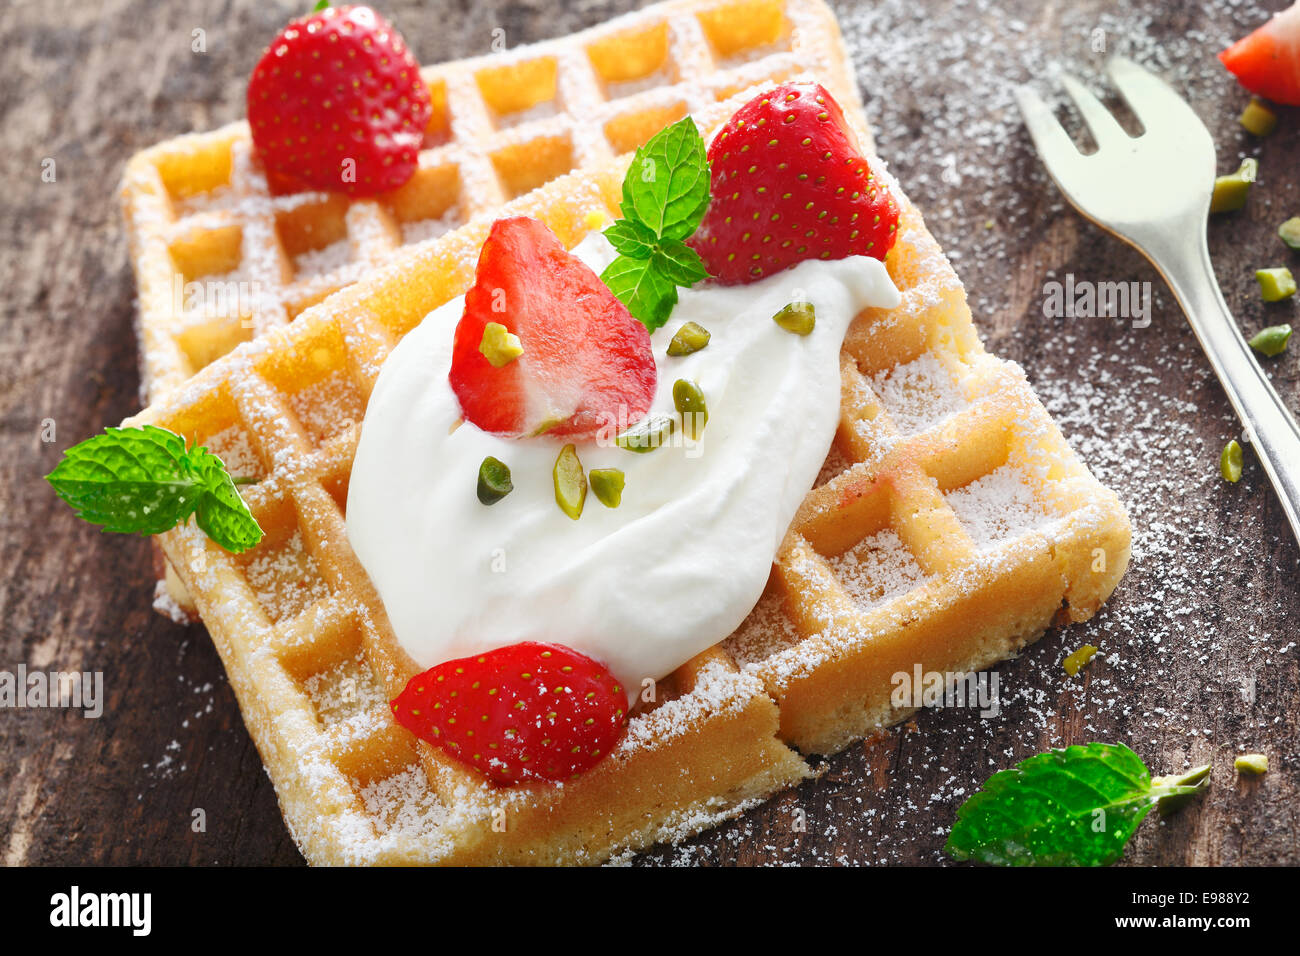 Closeup of a dollop of fresh whipped cream and sliced fresh strawberries topping a crisp golden waffle Stock Photo